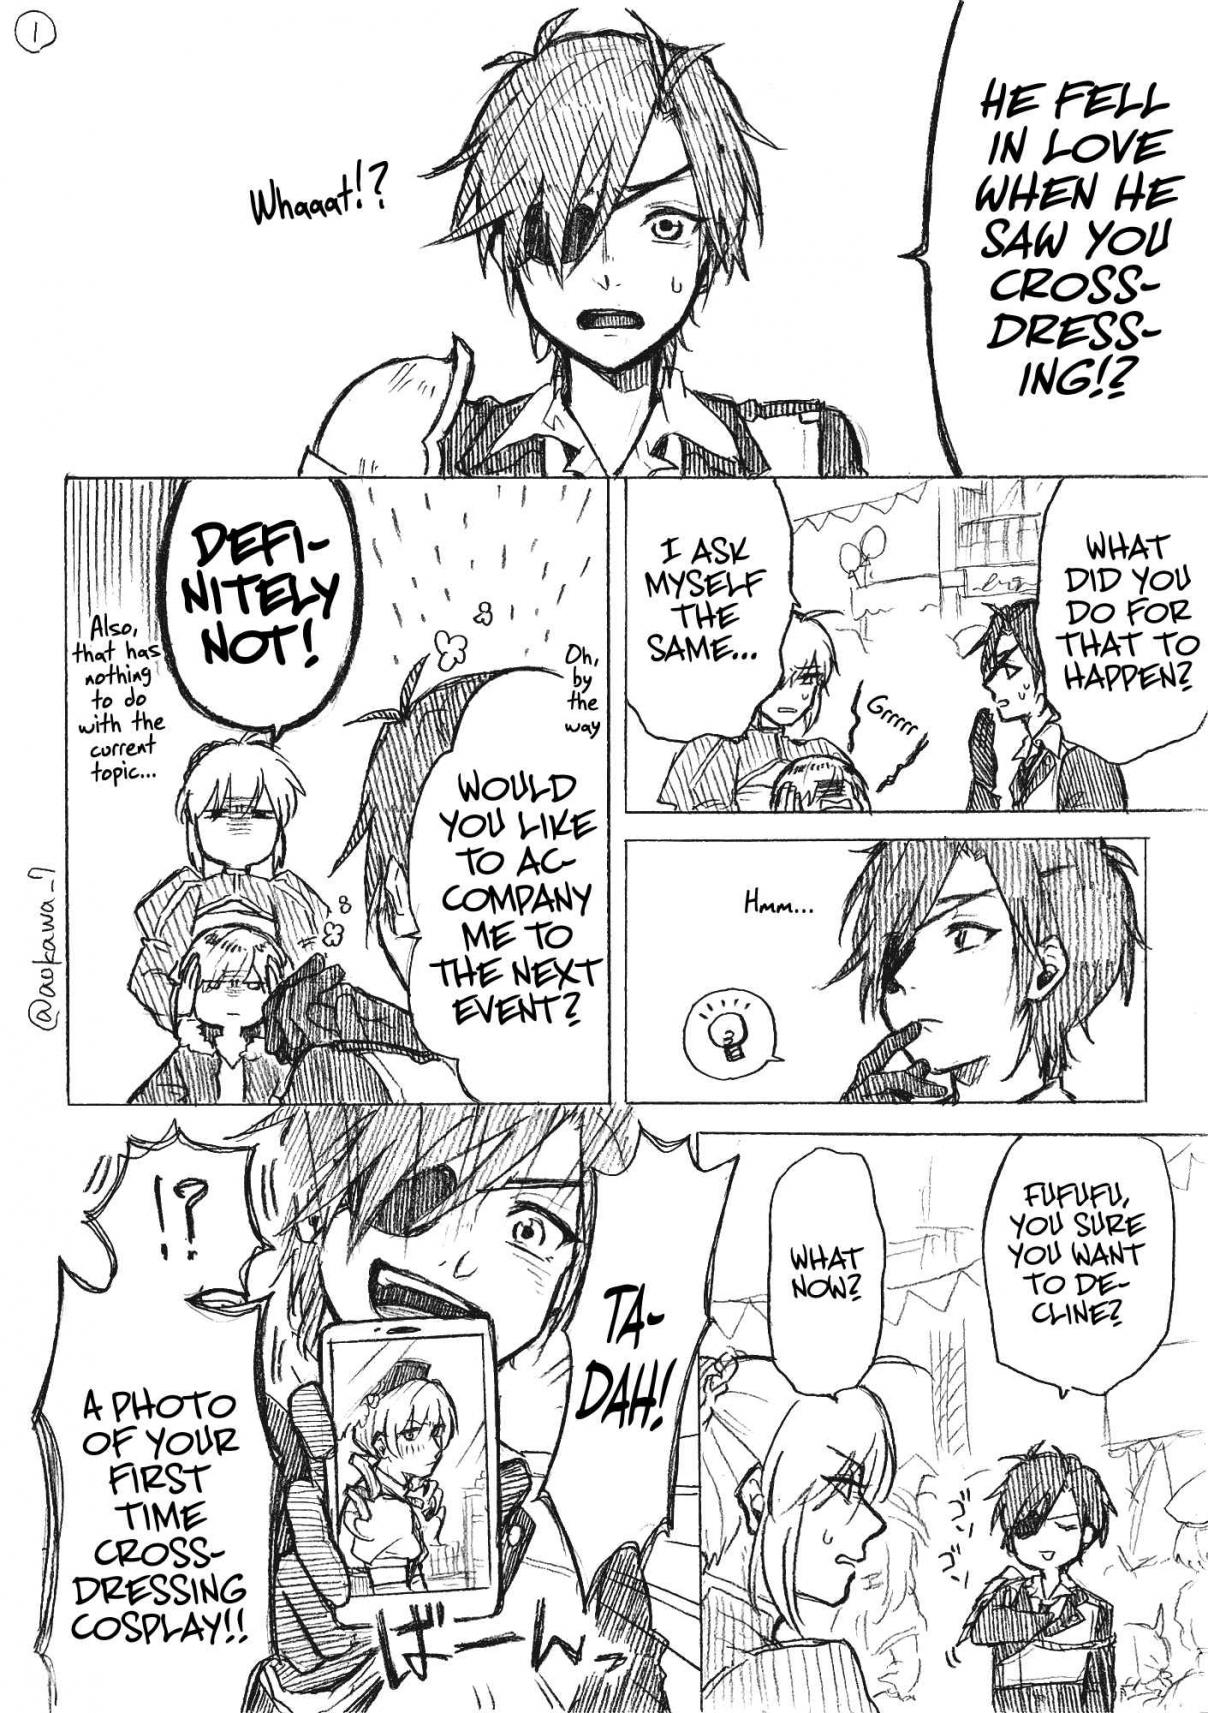 The Manga Where a Crossdressing Cosplayer Gets a Brother Ch. 2.2 Part 5